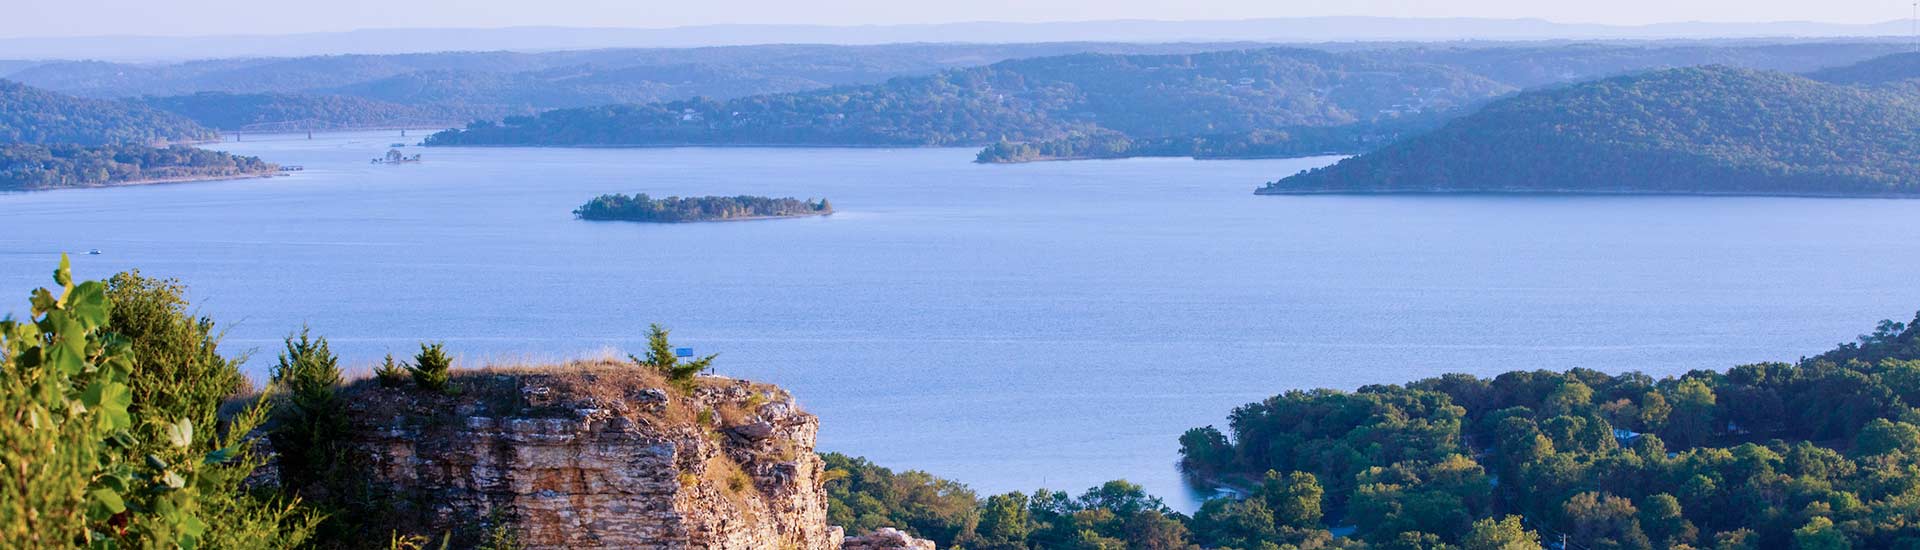 View of the blue waters and forested shorelines of Table Rock Lake from atop Baird Mountain, with cliff rock in foreground.